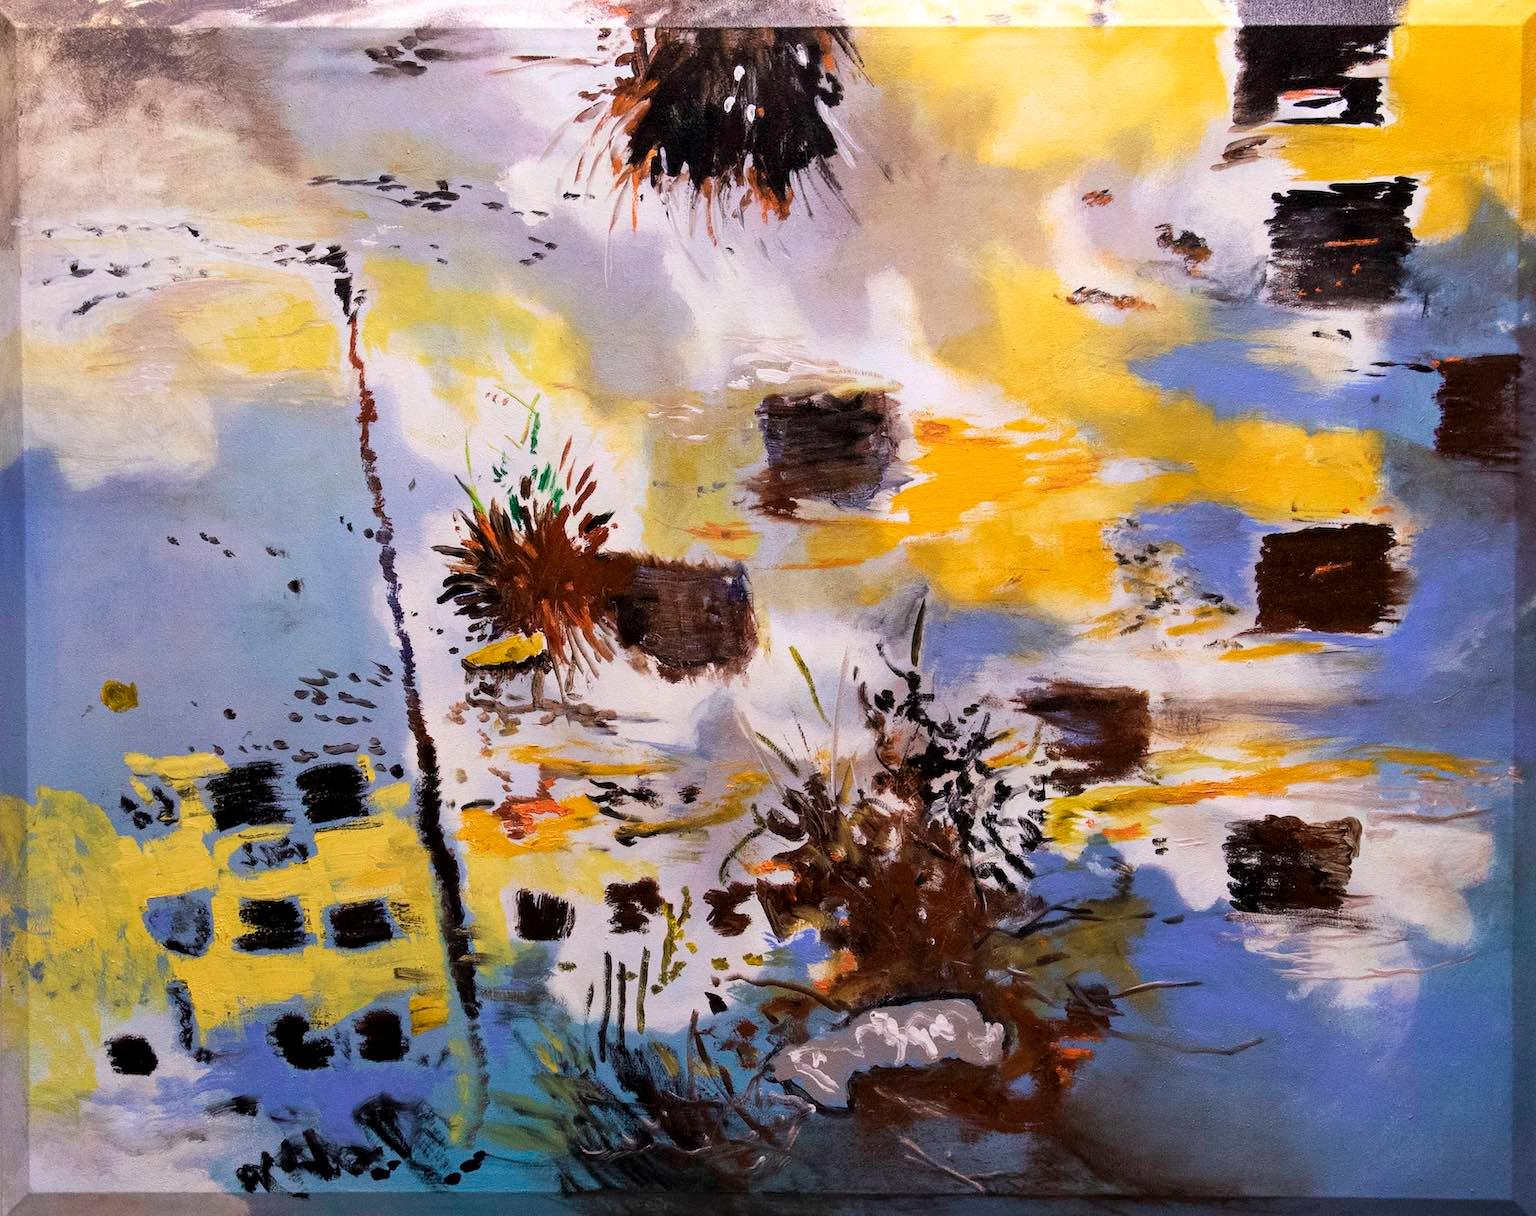 Antonio Ugarte Abstract Painting - City Water Reflection 50 X 63